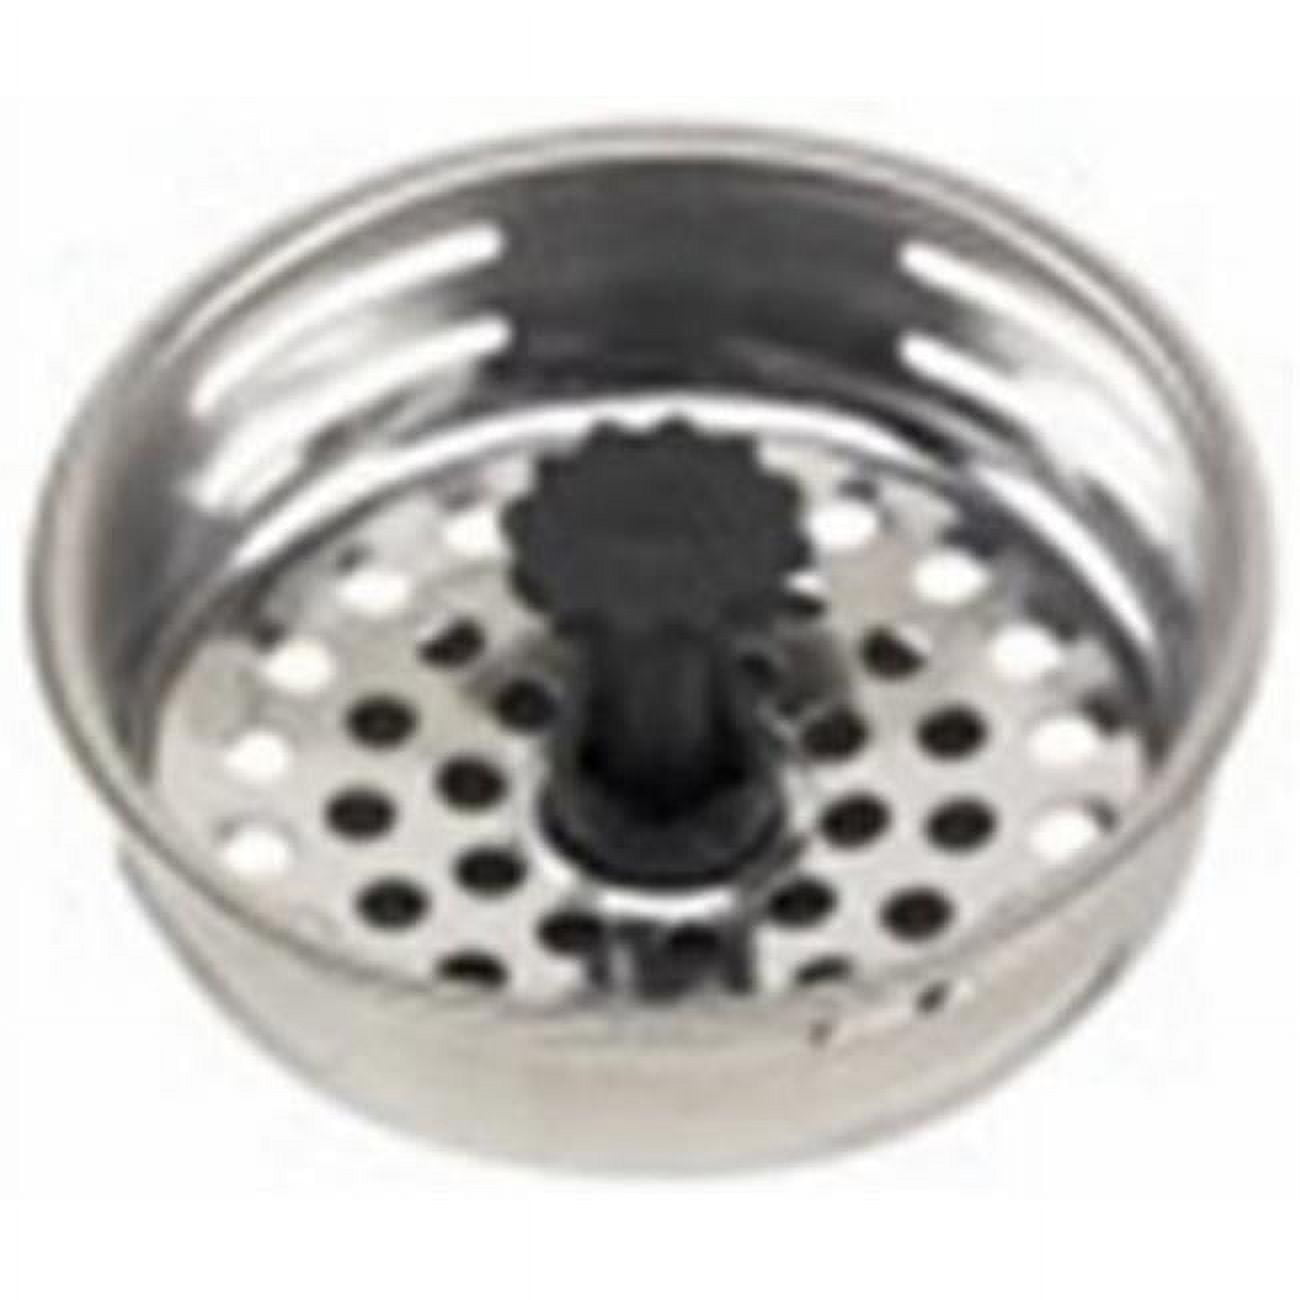 Cook's Kitchen Drain Stopper - 2 ct